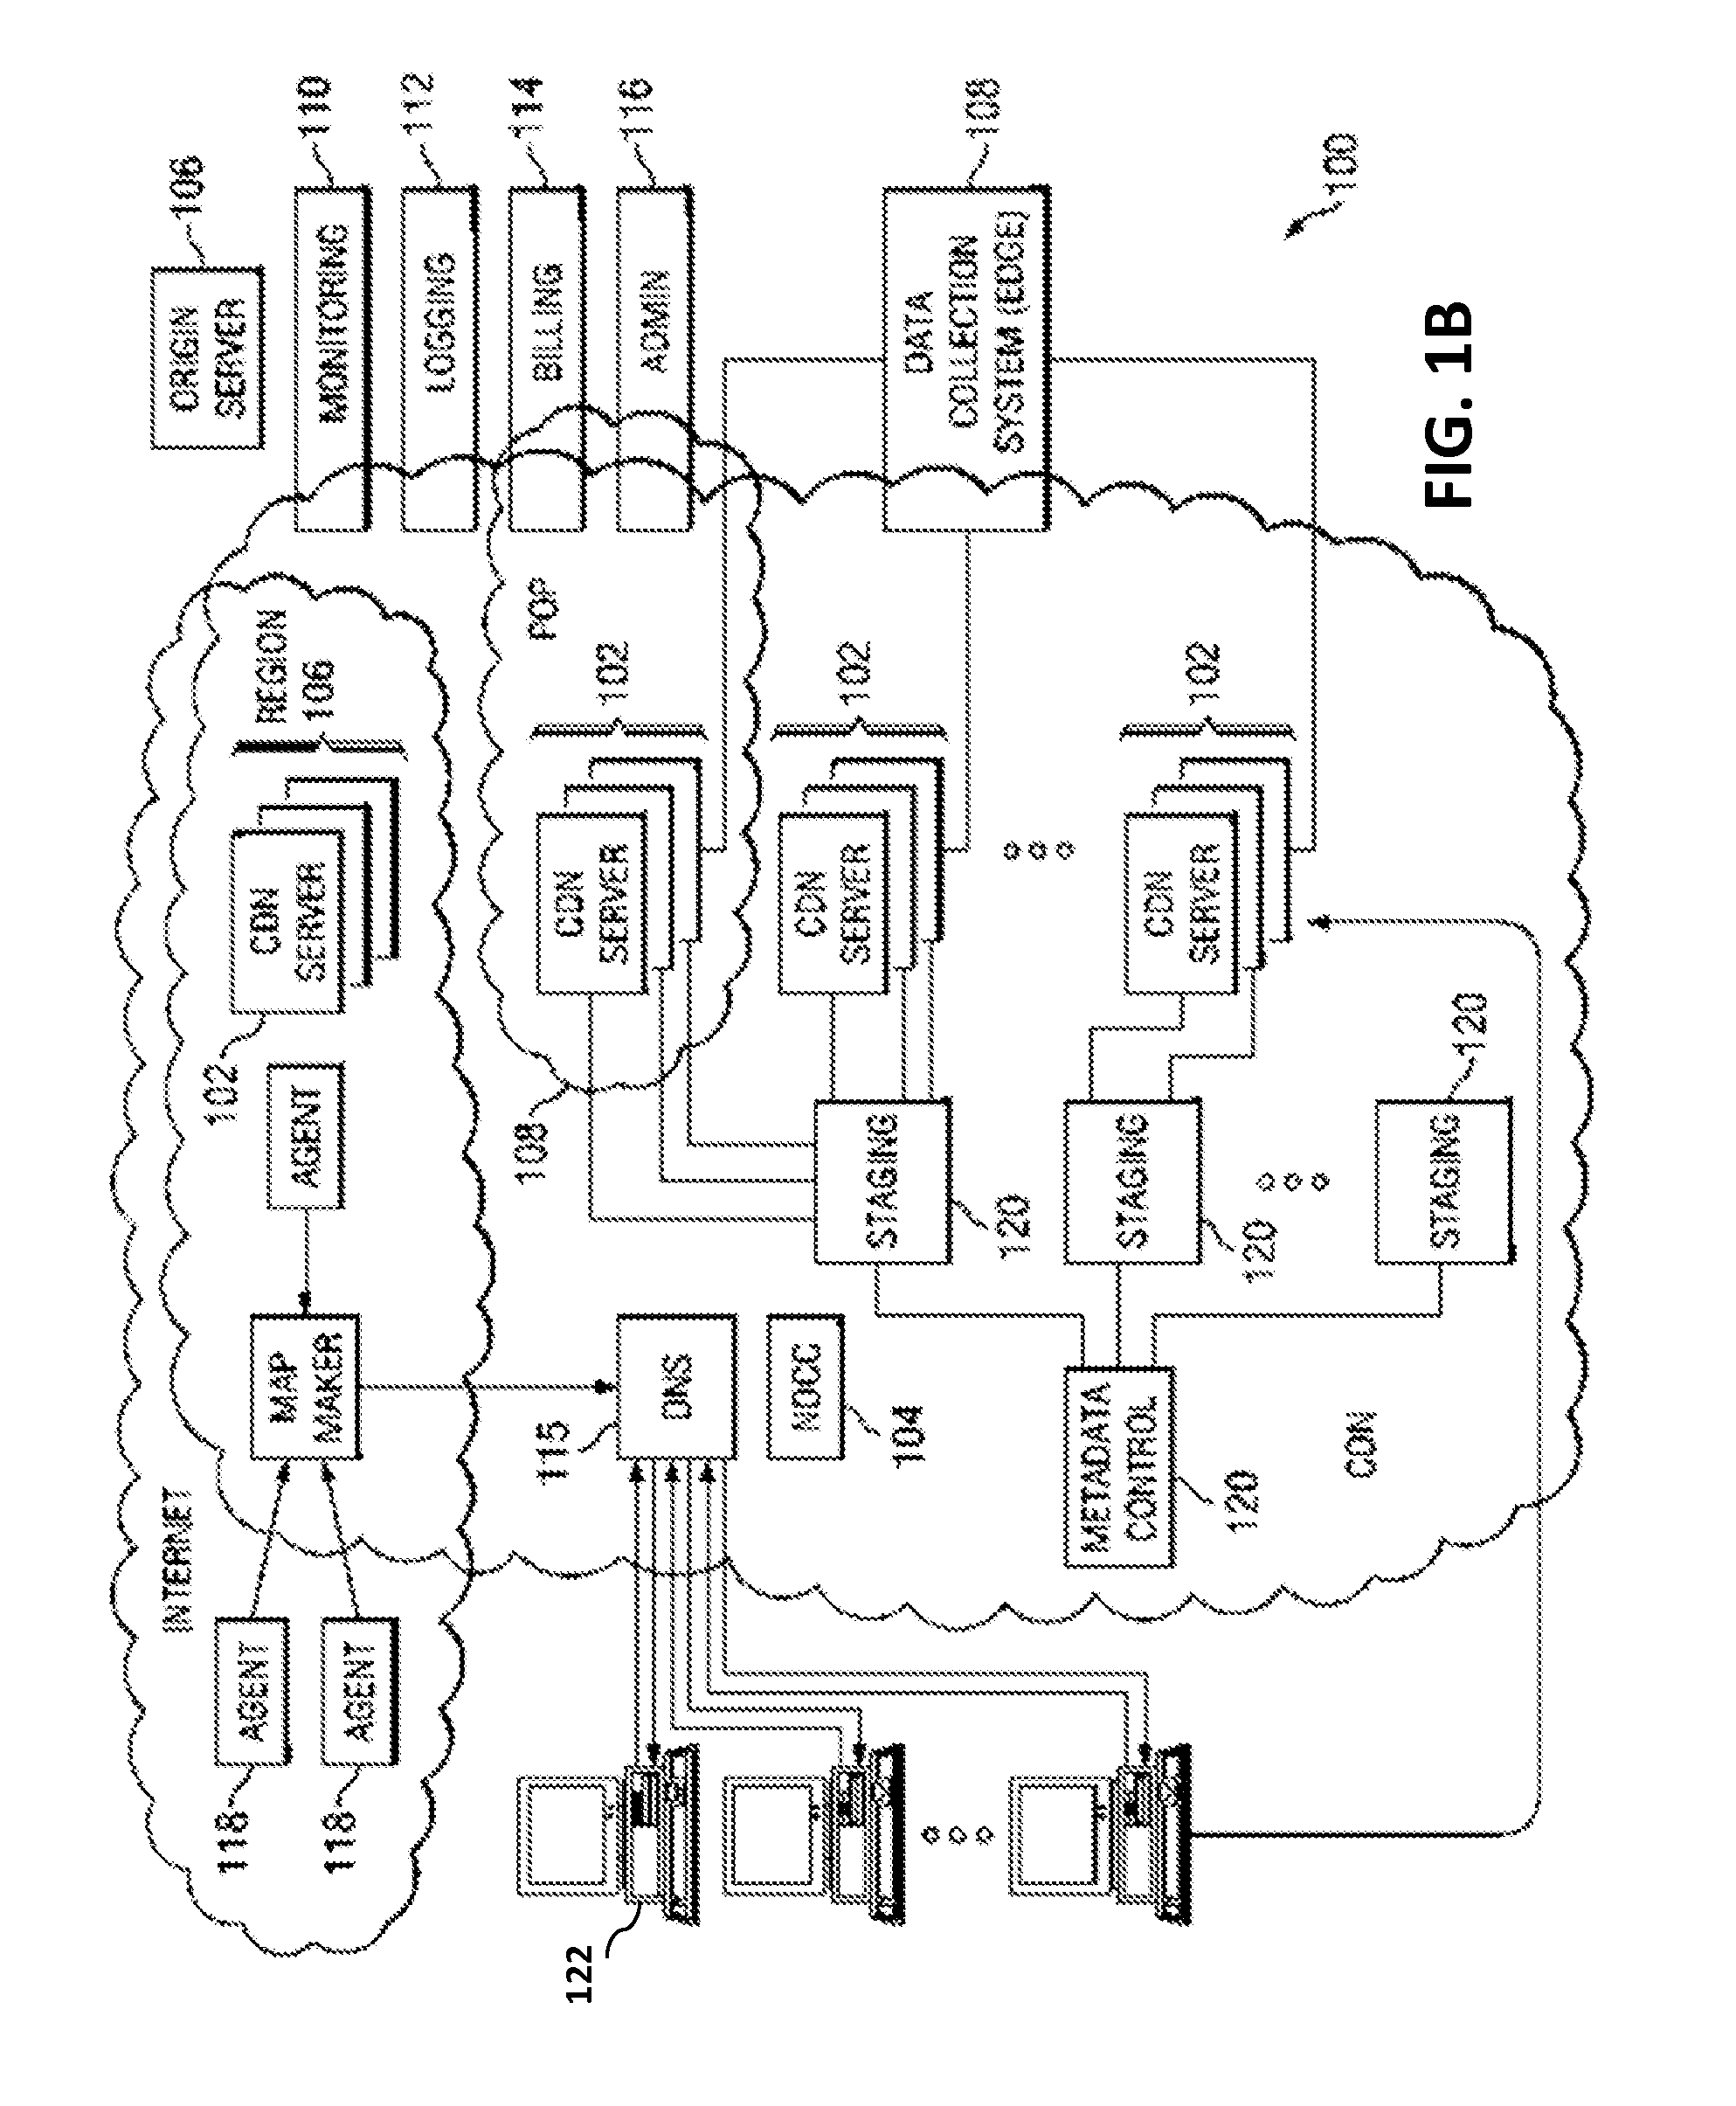 Systems and methods for identifying and characterizing client devices